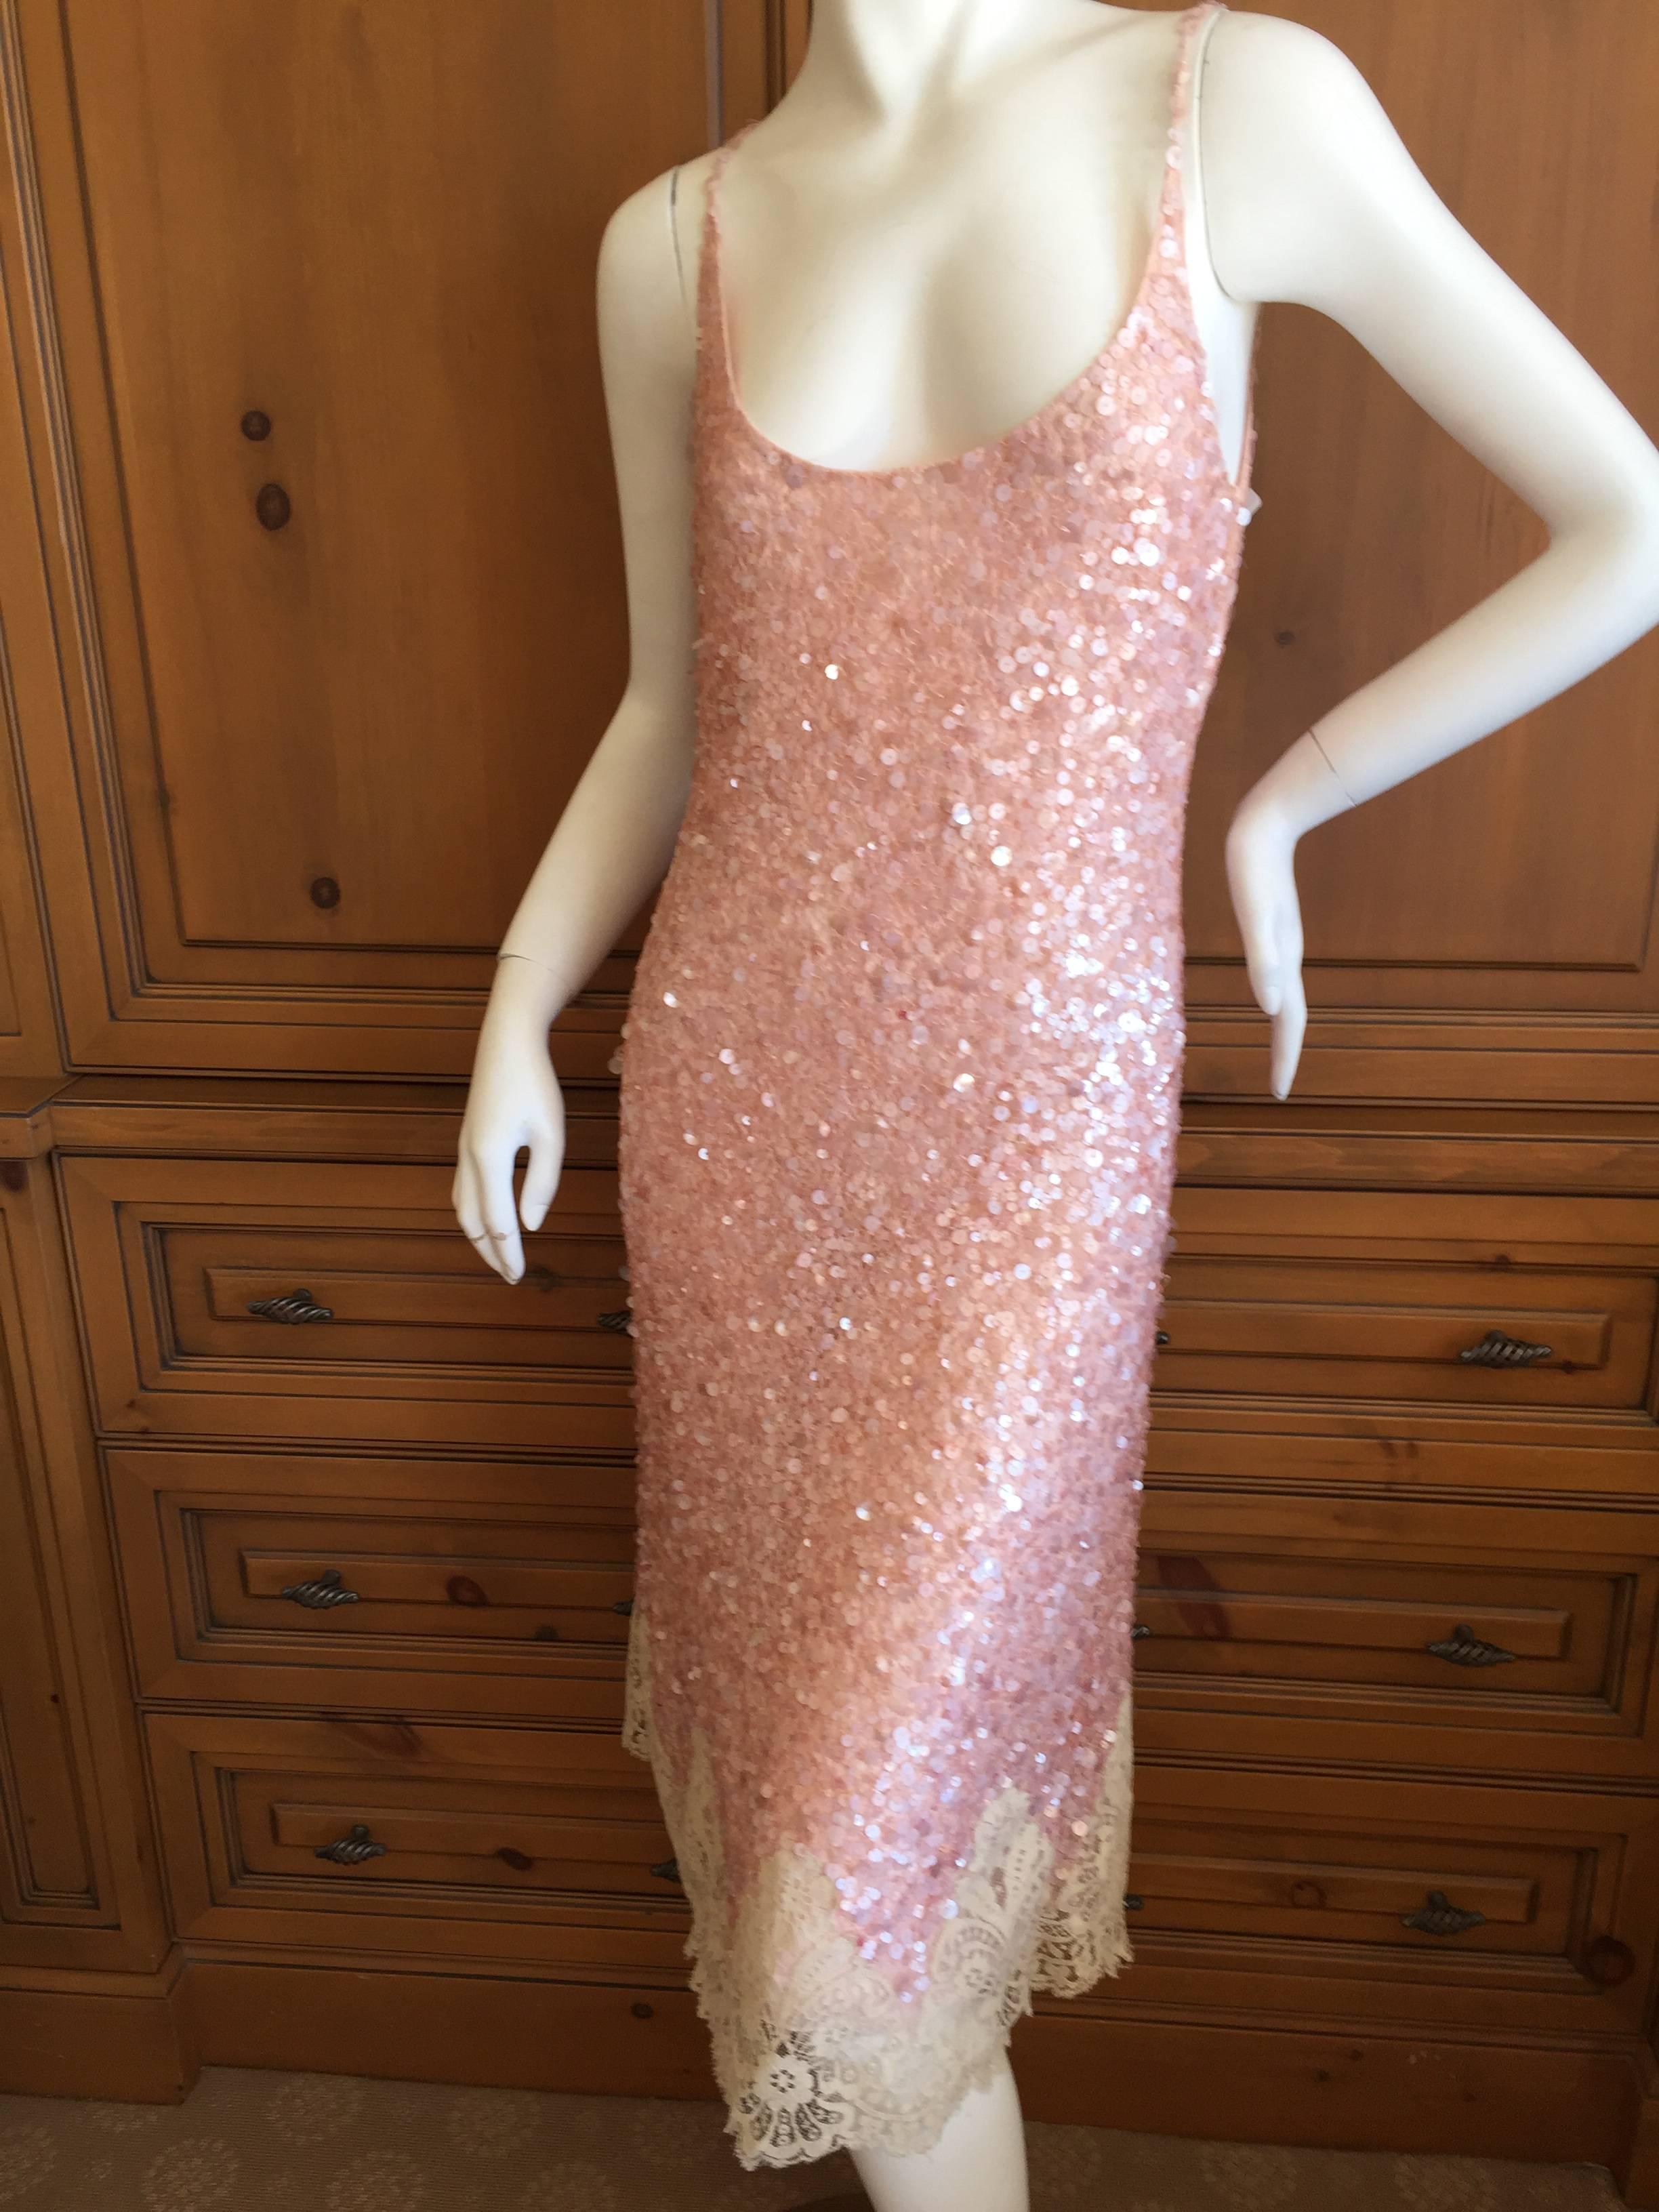 Exquisite Valentino Lace Trim Sequin Slip Dress by Maria Grazia Chiuri &Pier Paolo Piccioli.
New with Tags
This is so pretty, the photos don't capture it's charm
Trimmed in lace at the hem, pure luxe.
Marked size 12 it runs very small, please